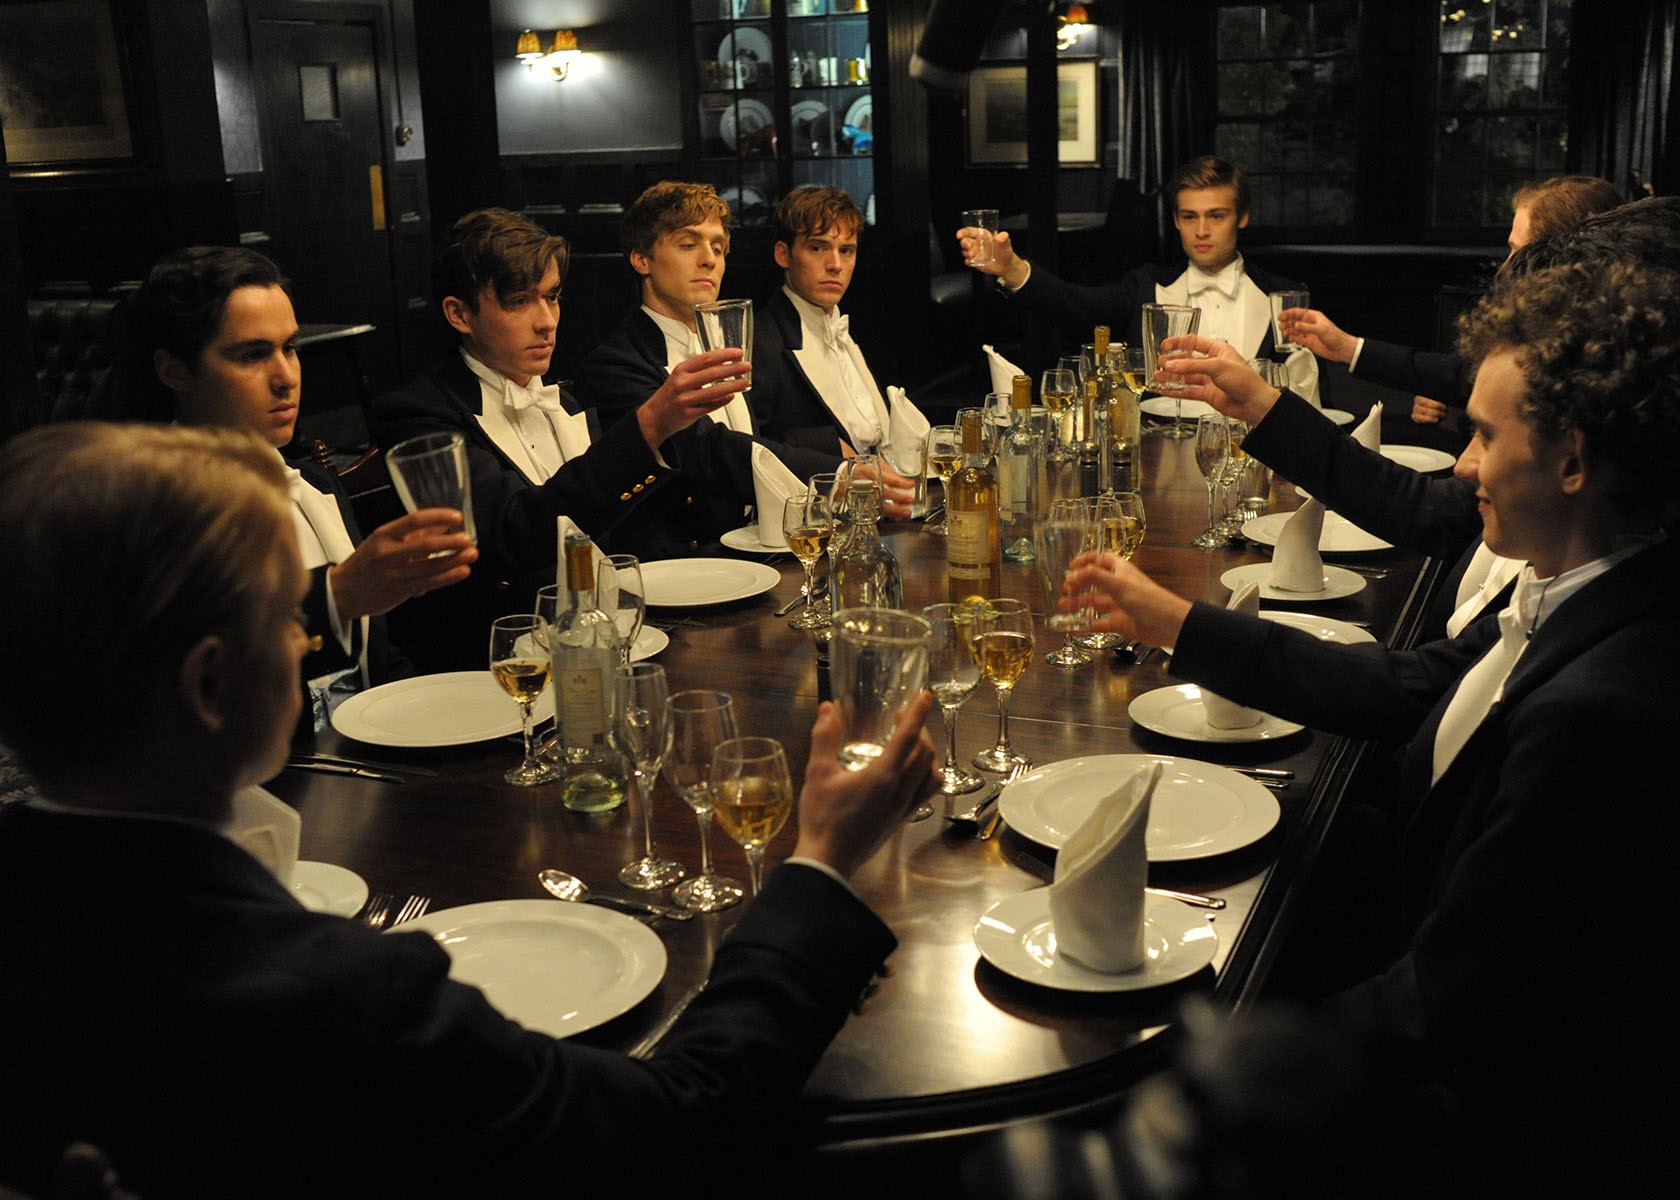 Joey Batey, Matthew Beard, Jack Farthing, Douglas Booth and Olly Alexander in IFC Films' The Riot Club (2015)